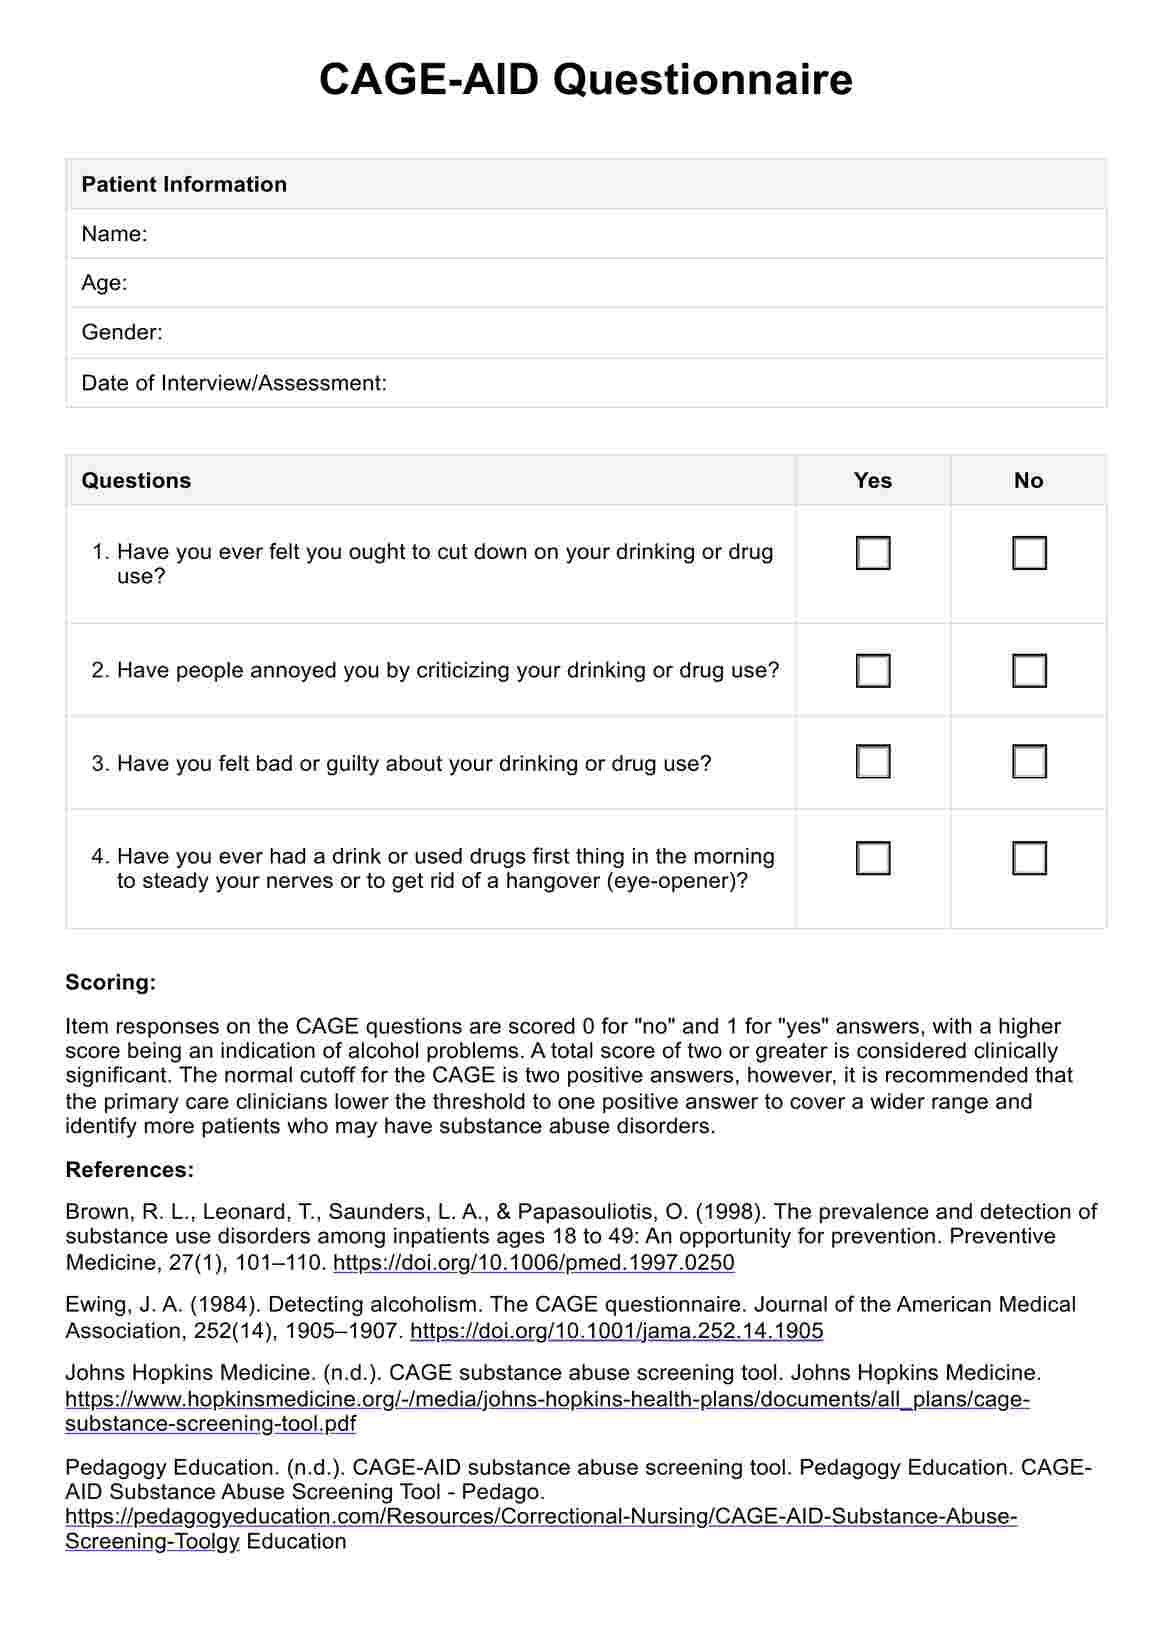 CAGE-AID Questionnaire PDF Example